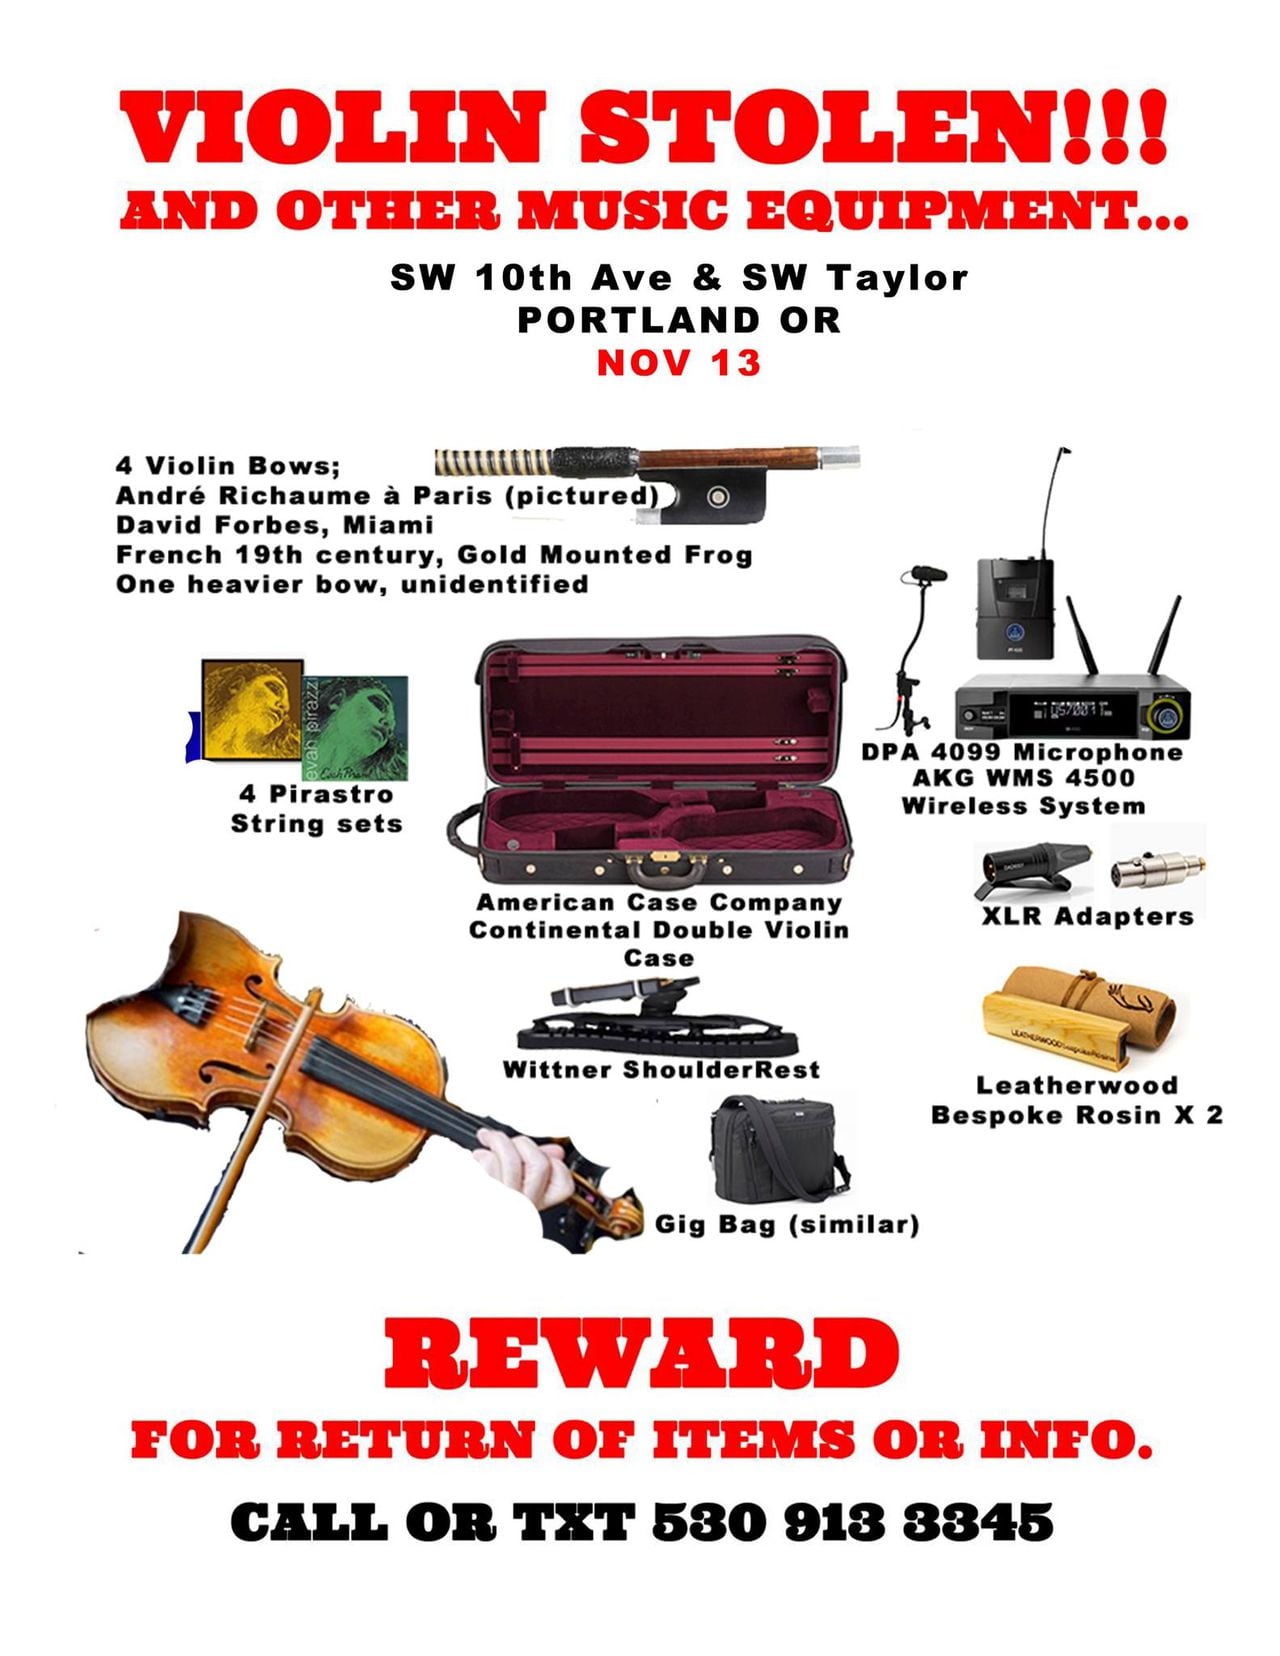 A flyer shows a picture of a violin and other musical equipment. It reads "VIOLIN STOLEN!!!" and lists a number to call or text: 530-913-3345.